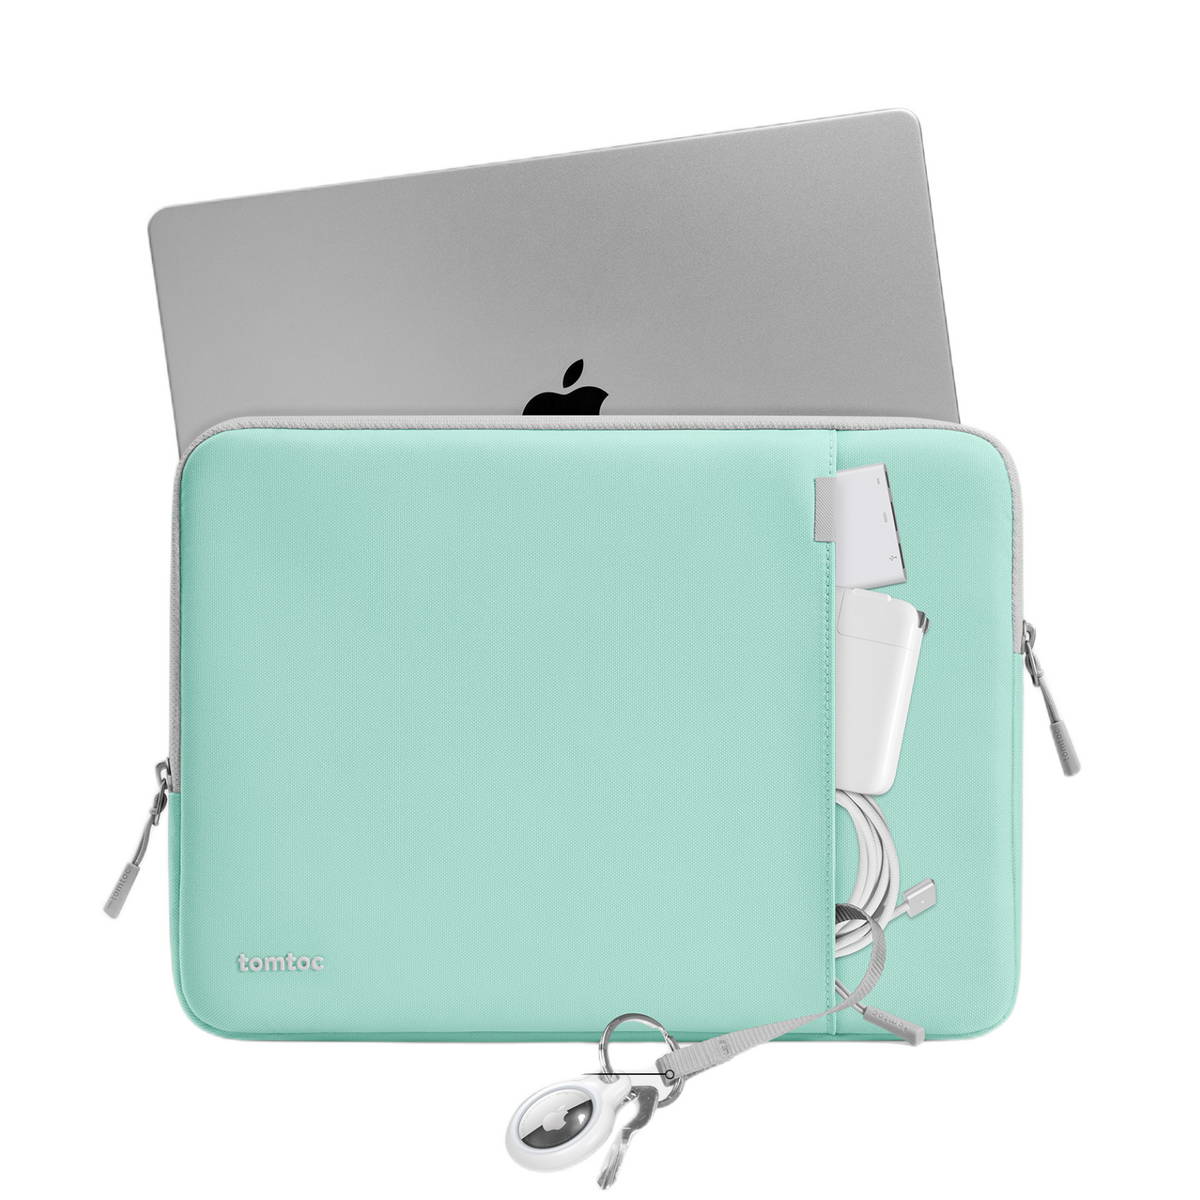 secondary_Defender-A13 Laptop Sleeve for 13-inch MacBook | Mint Blue